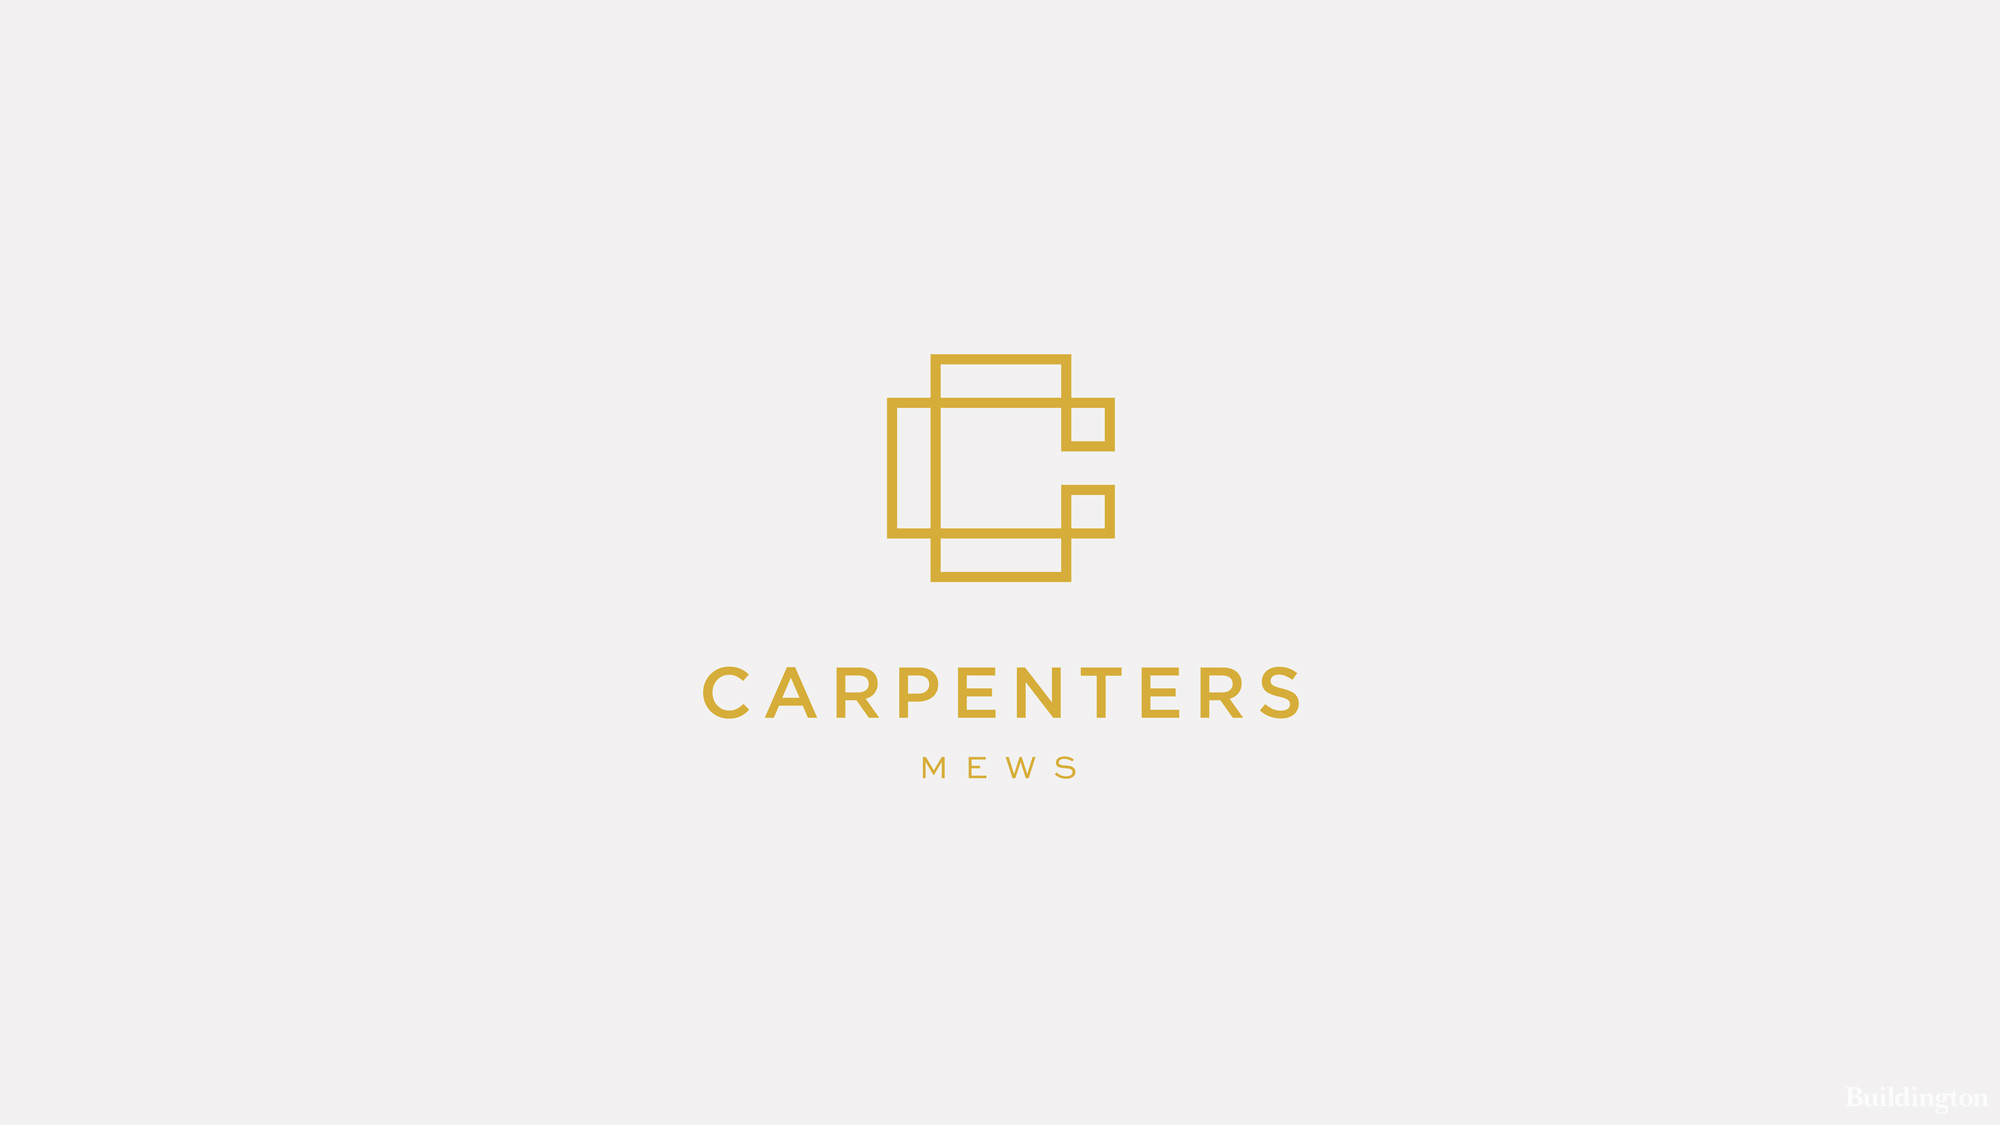 The brochure cover of Carpenters Mews by Capri Developments 